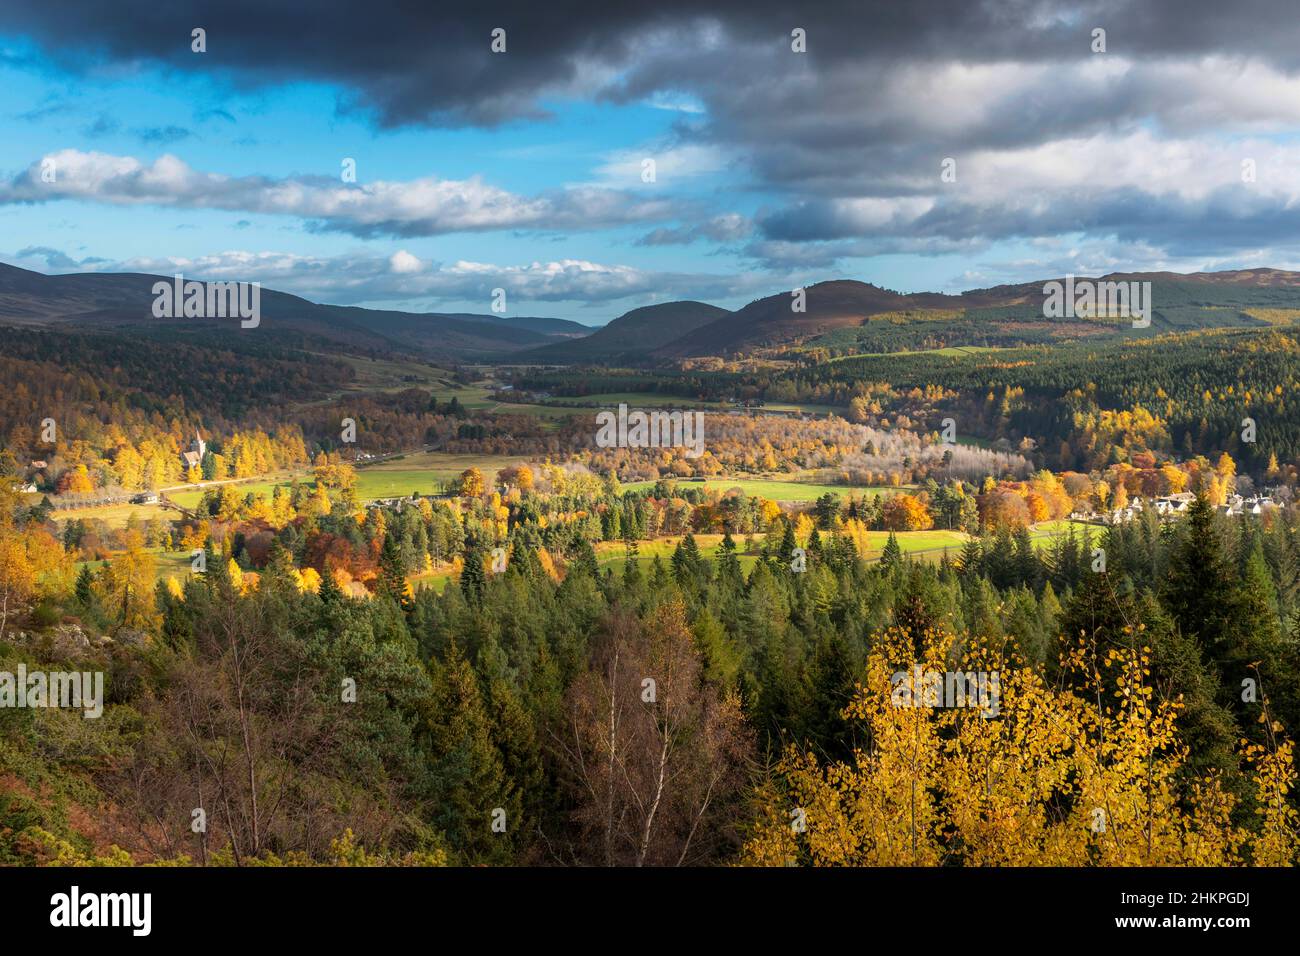 BALMORAL ROYAL DEESIDE SCOTLAND AUTUMN SCENE VIEW OF CRATHIE CHURCH THE RIVER DEE ESTATE HOUSES AND COLOURFUL TREES Stock Photo